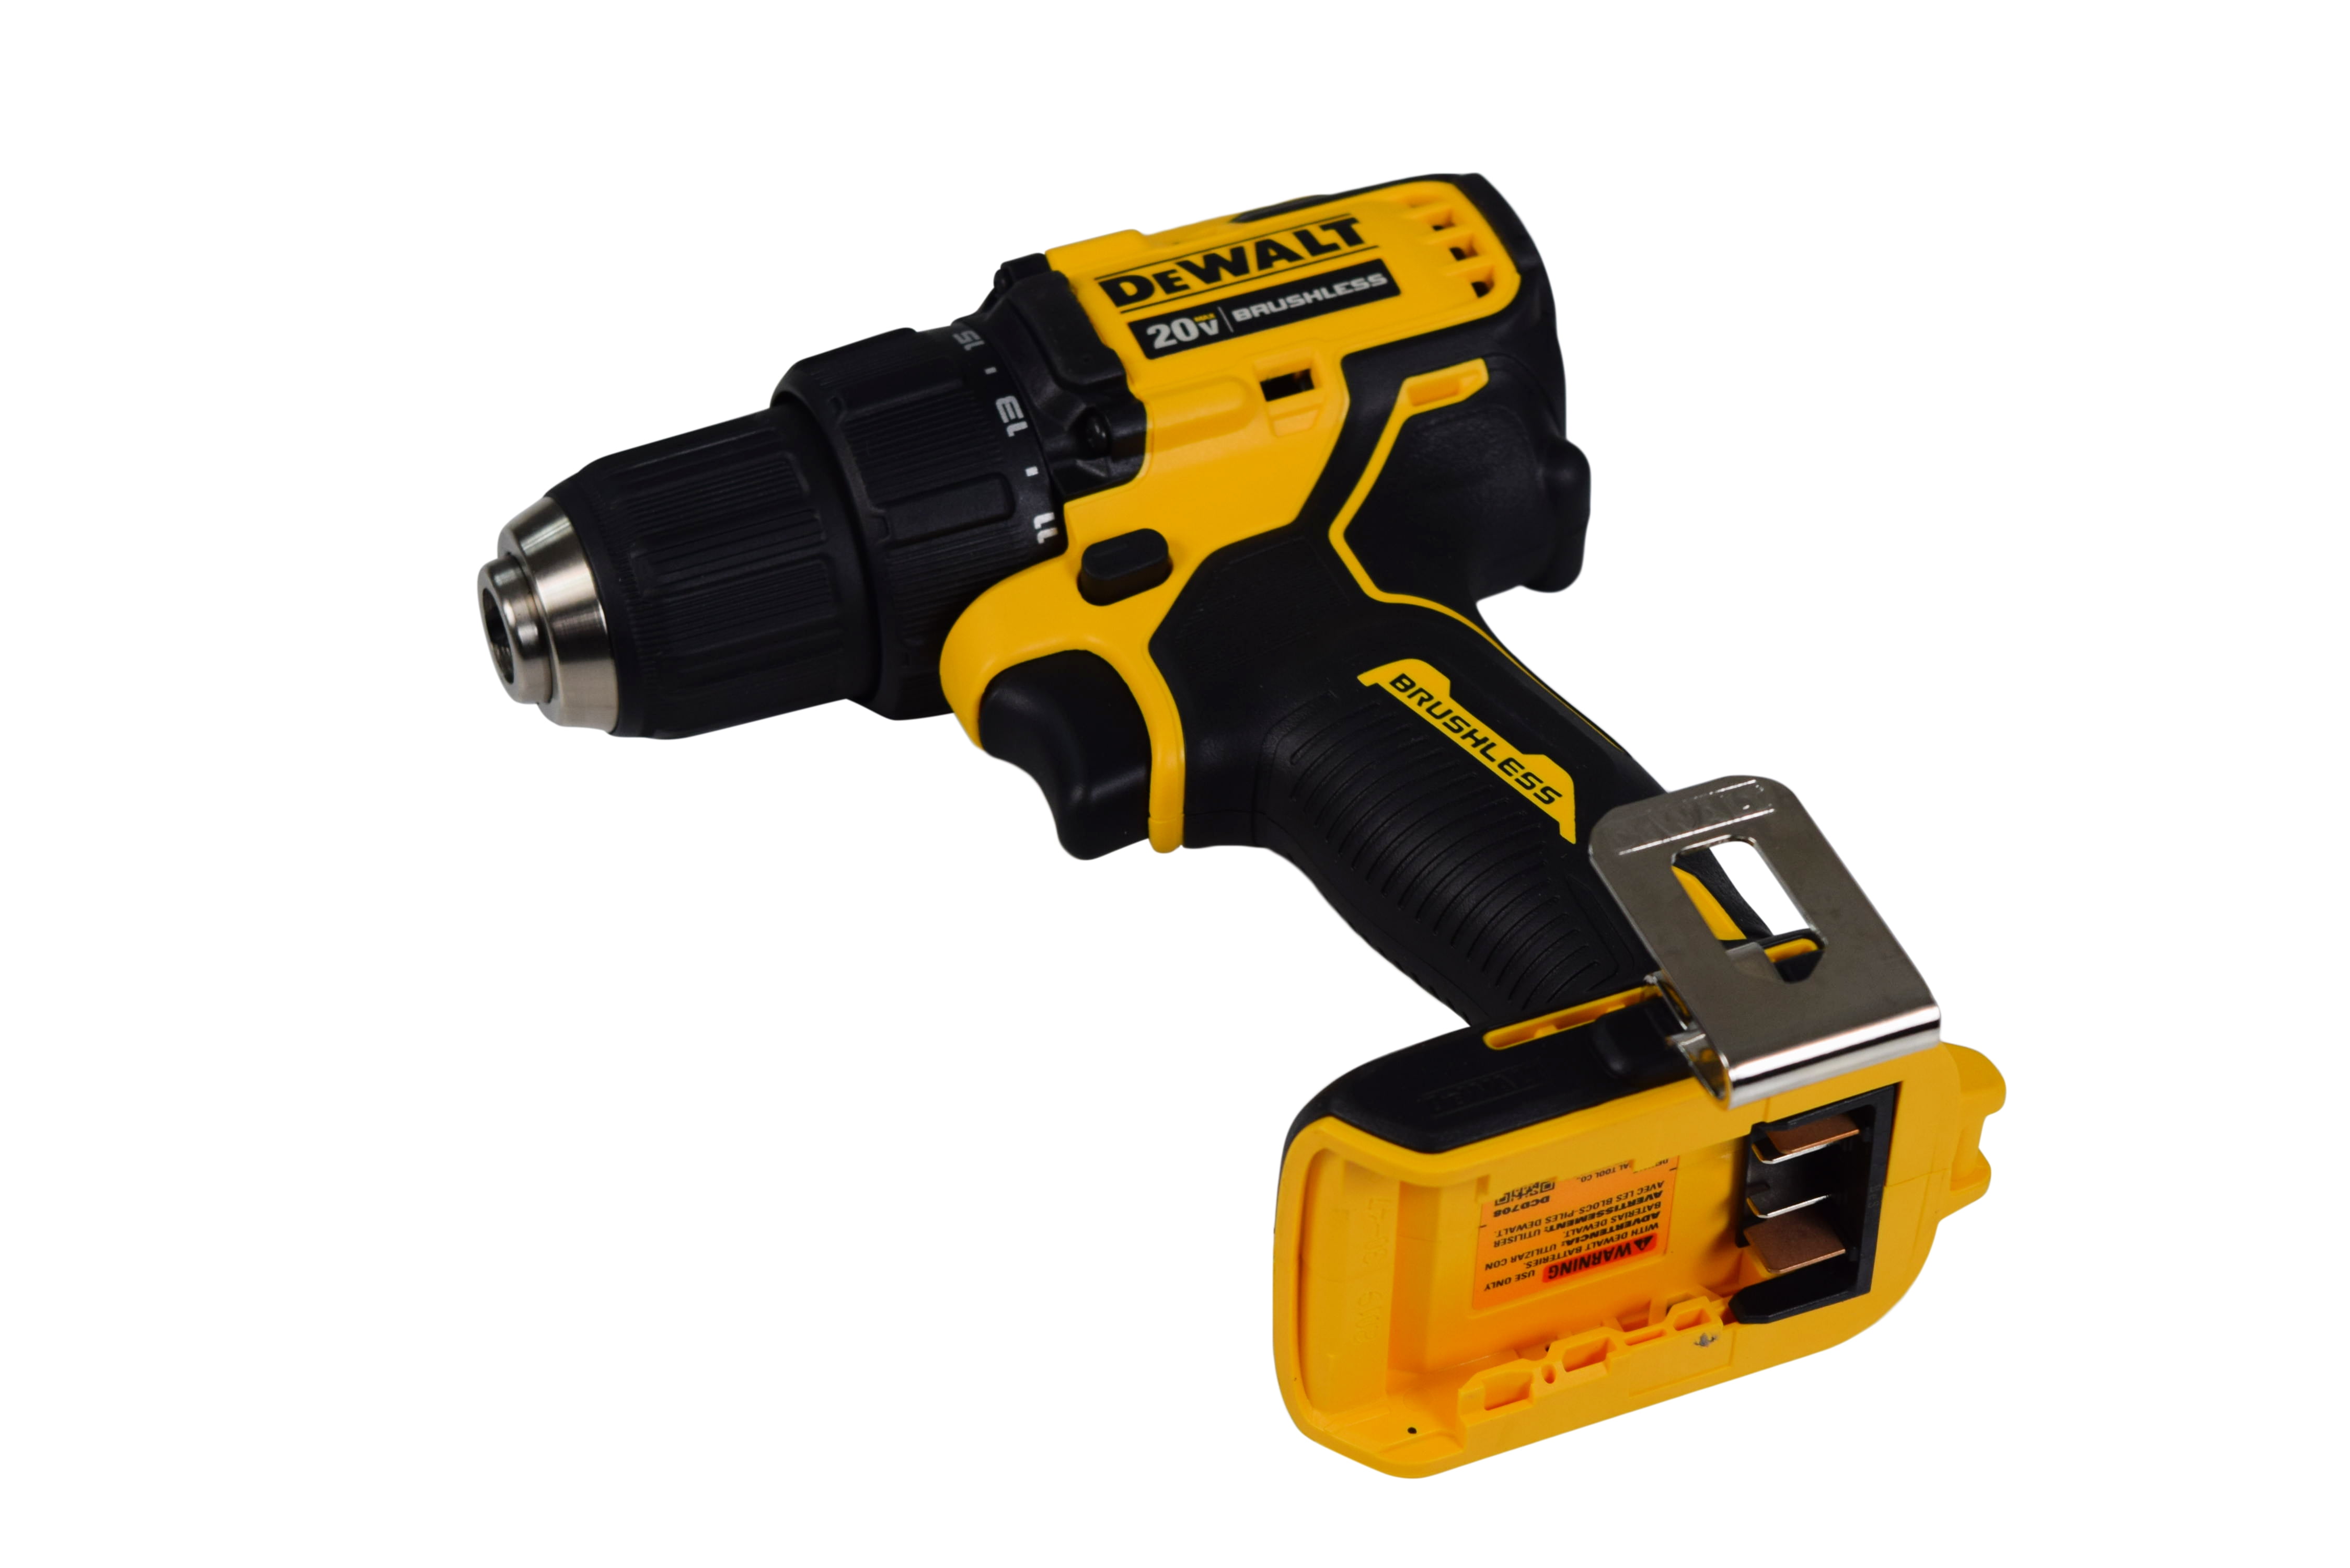 DEWALT Max 1/2" 20V Brushless Compact Atomic Drill/Driver DCD708B (Bare Tool Only, & Charger Sold Separately) -